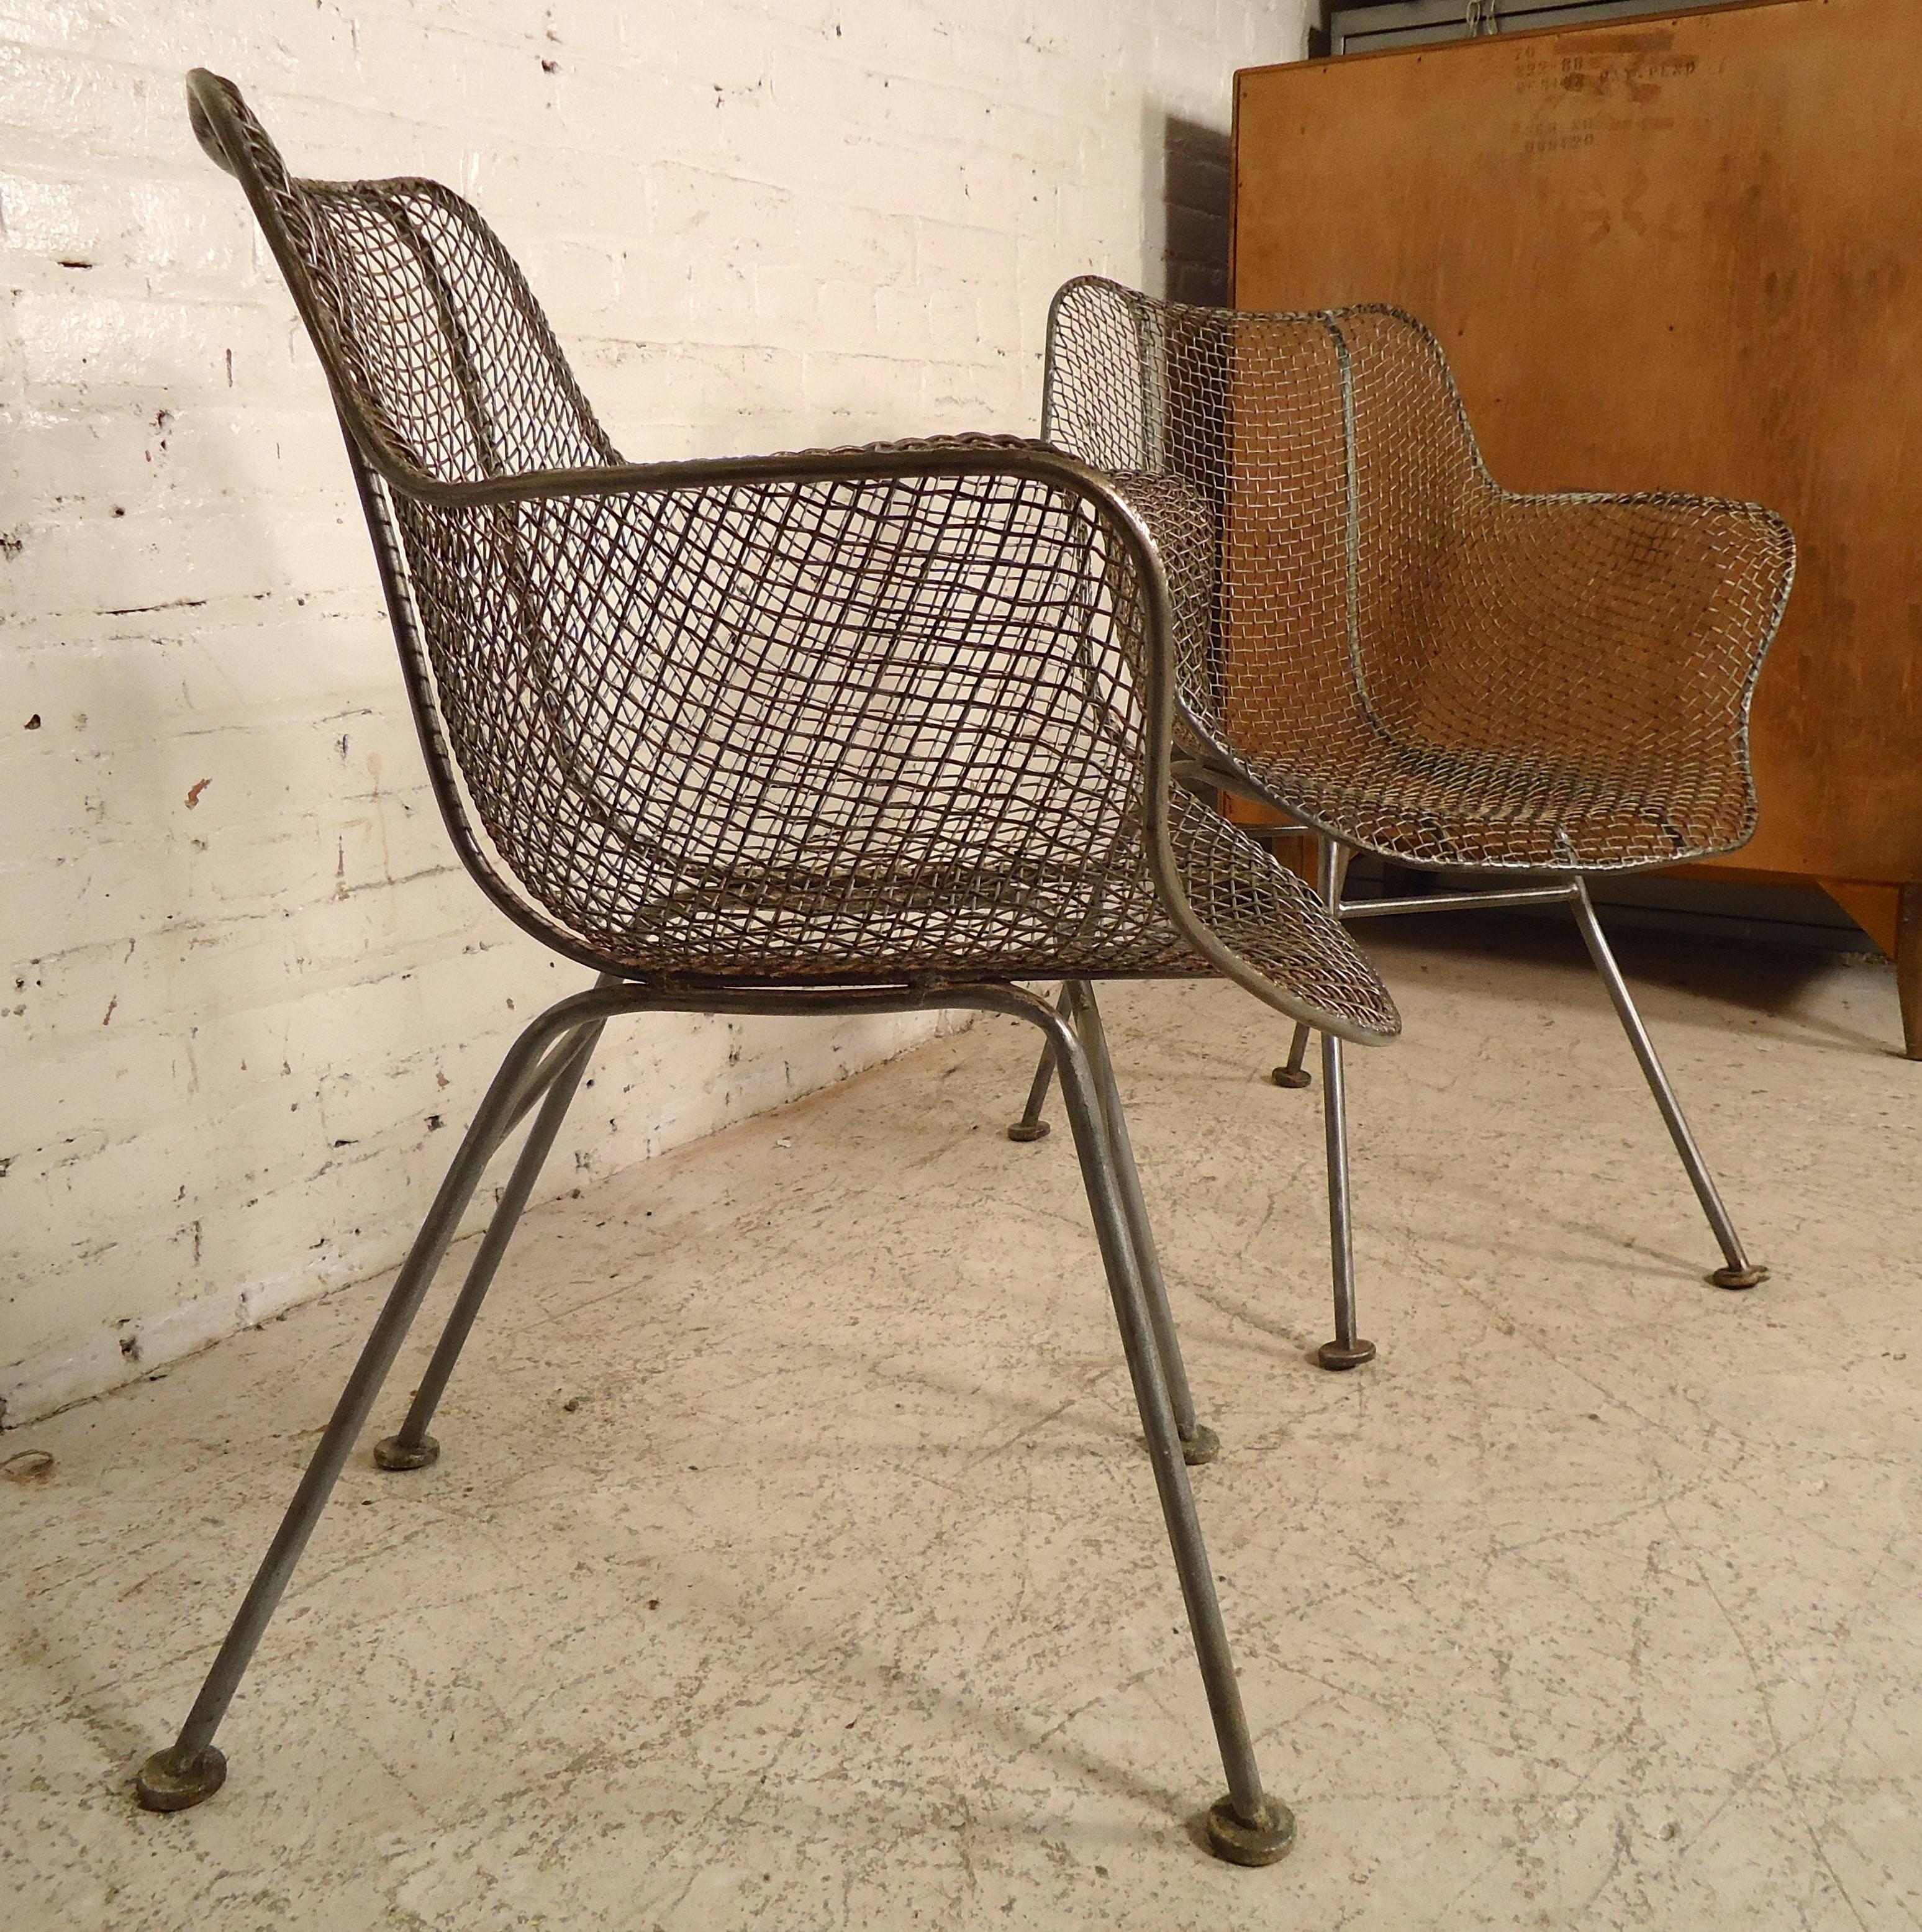 Beautifully sculpted chairs made of woven wrought iron set on strong legs. The form gives support and comfort. These chairs from Russell Woodard go very quickly because of there stylish form and long lasting durability.

(Please confirm item